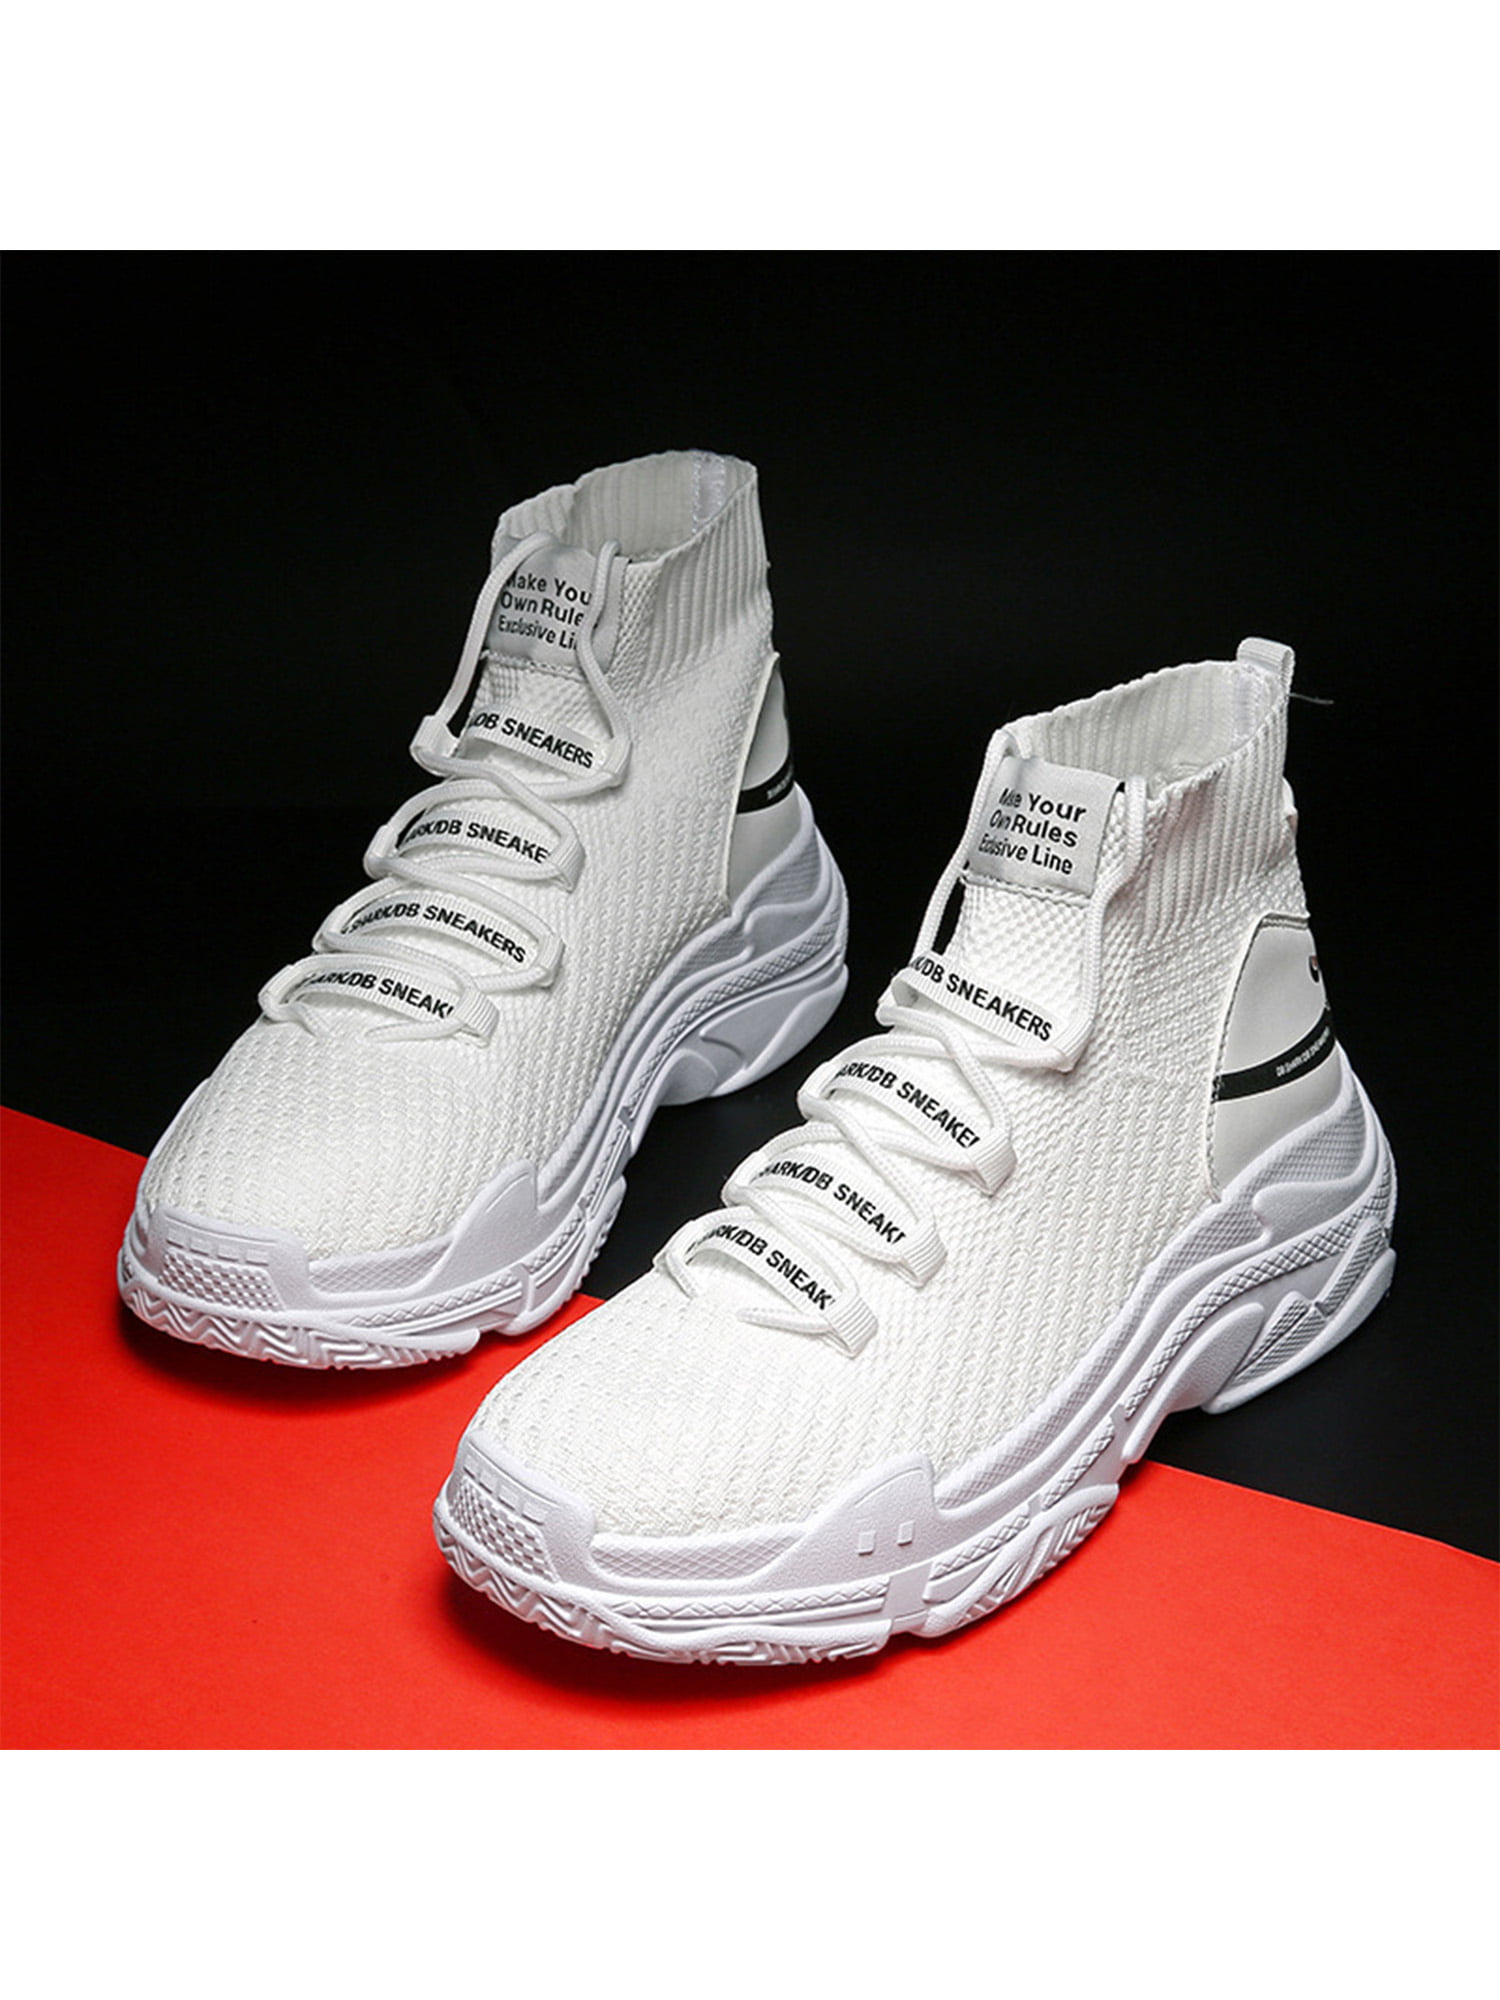 Men's High Top Casual Outdoor Running Sports Athletic Sneakers Walking Shoes 